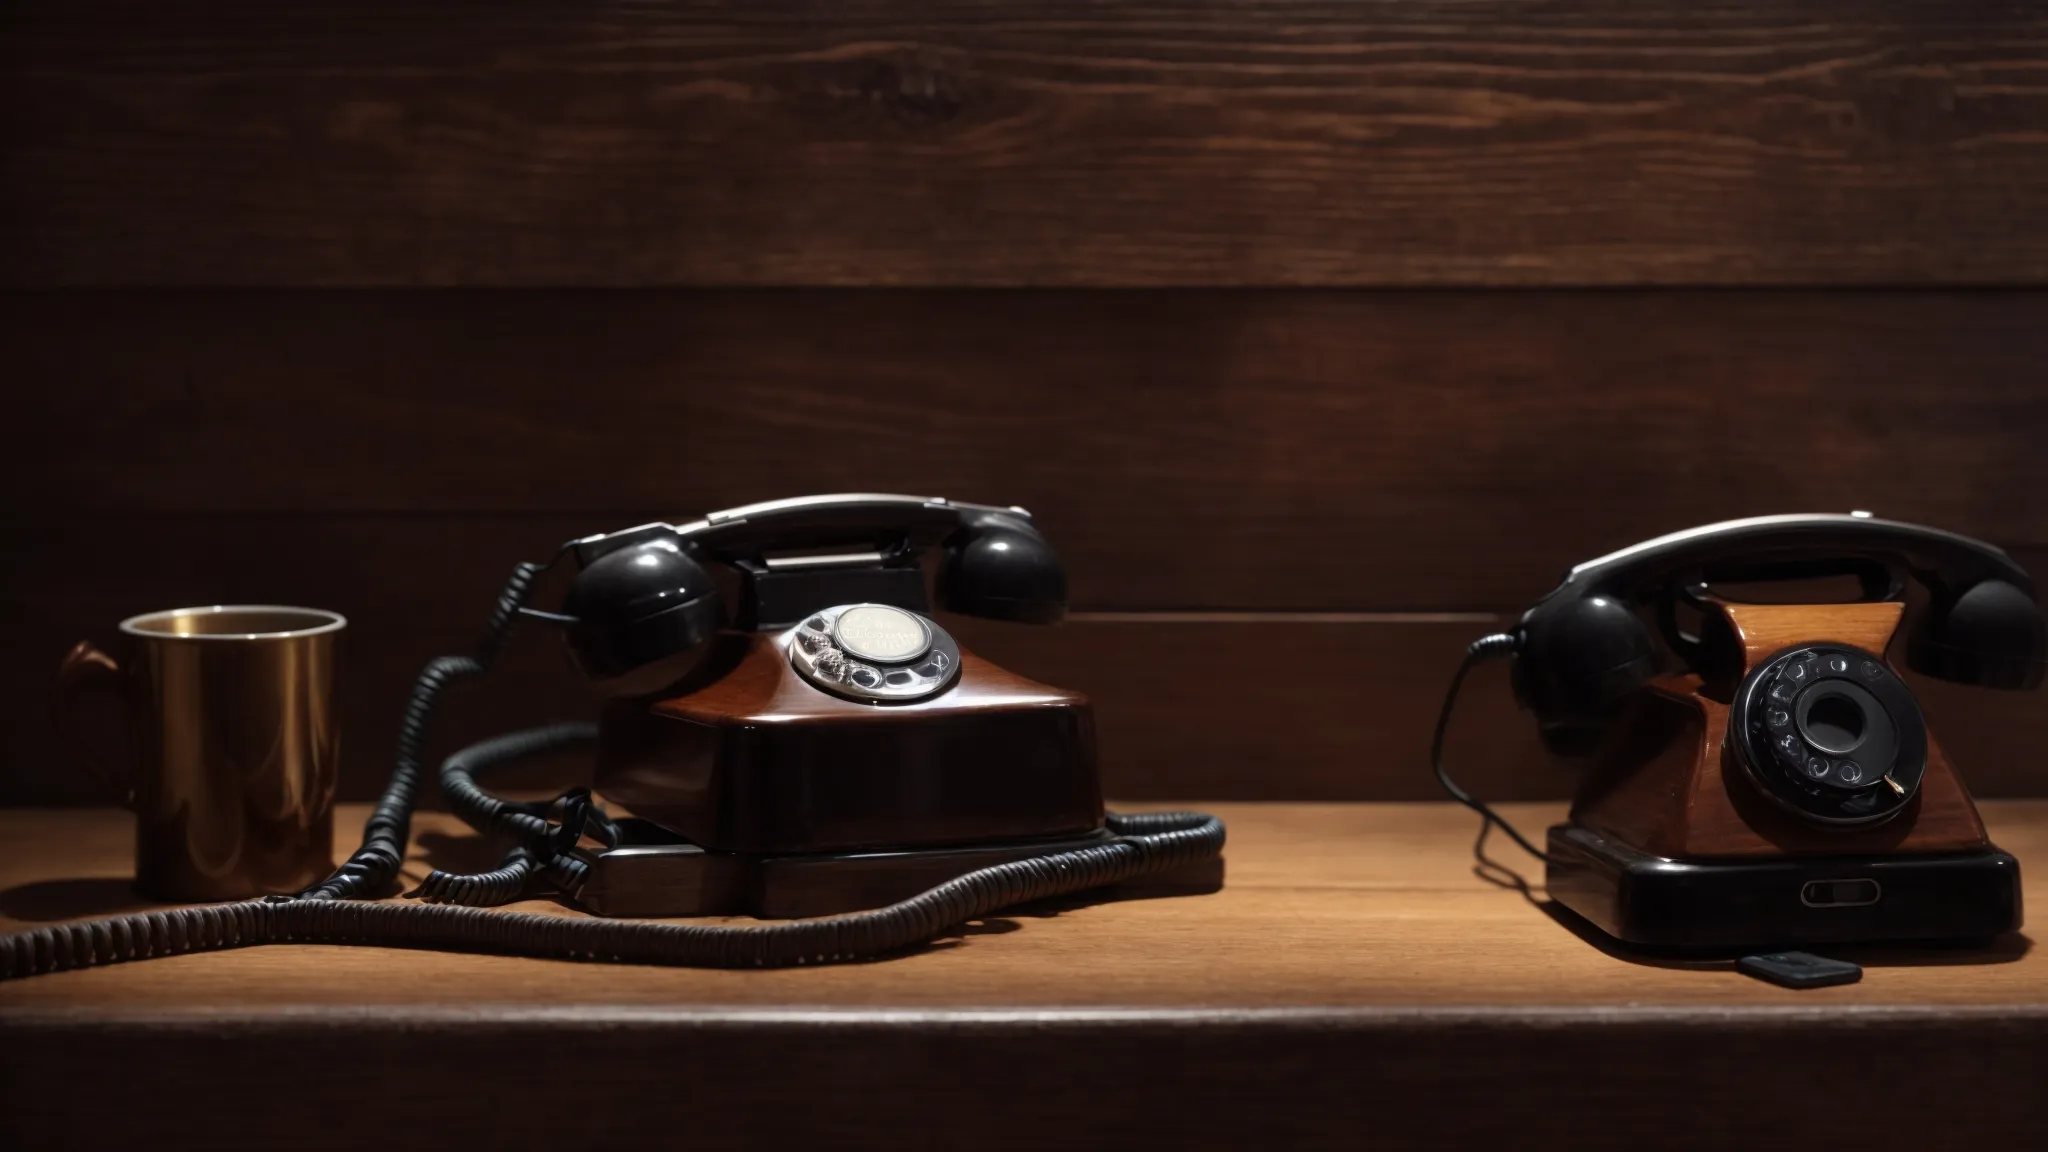 a disconnected vintage phone rests beside a modern smartphone on a wooden table, illustrating the evolution of communication technology.